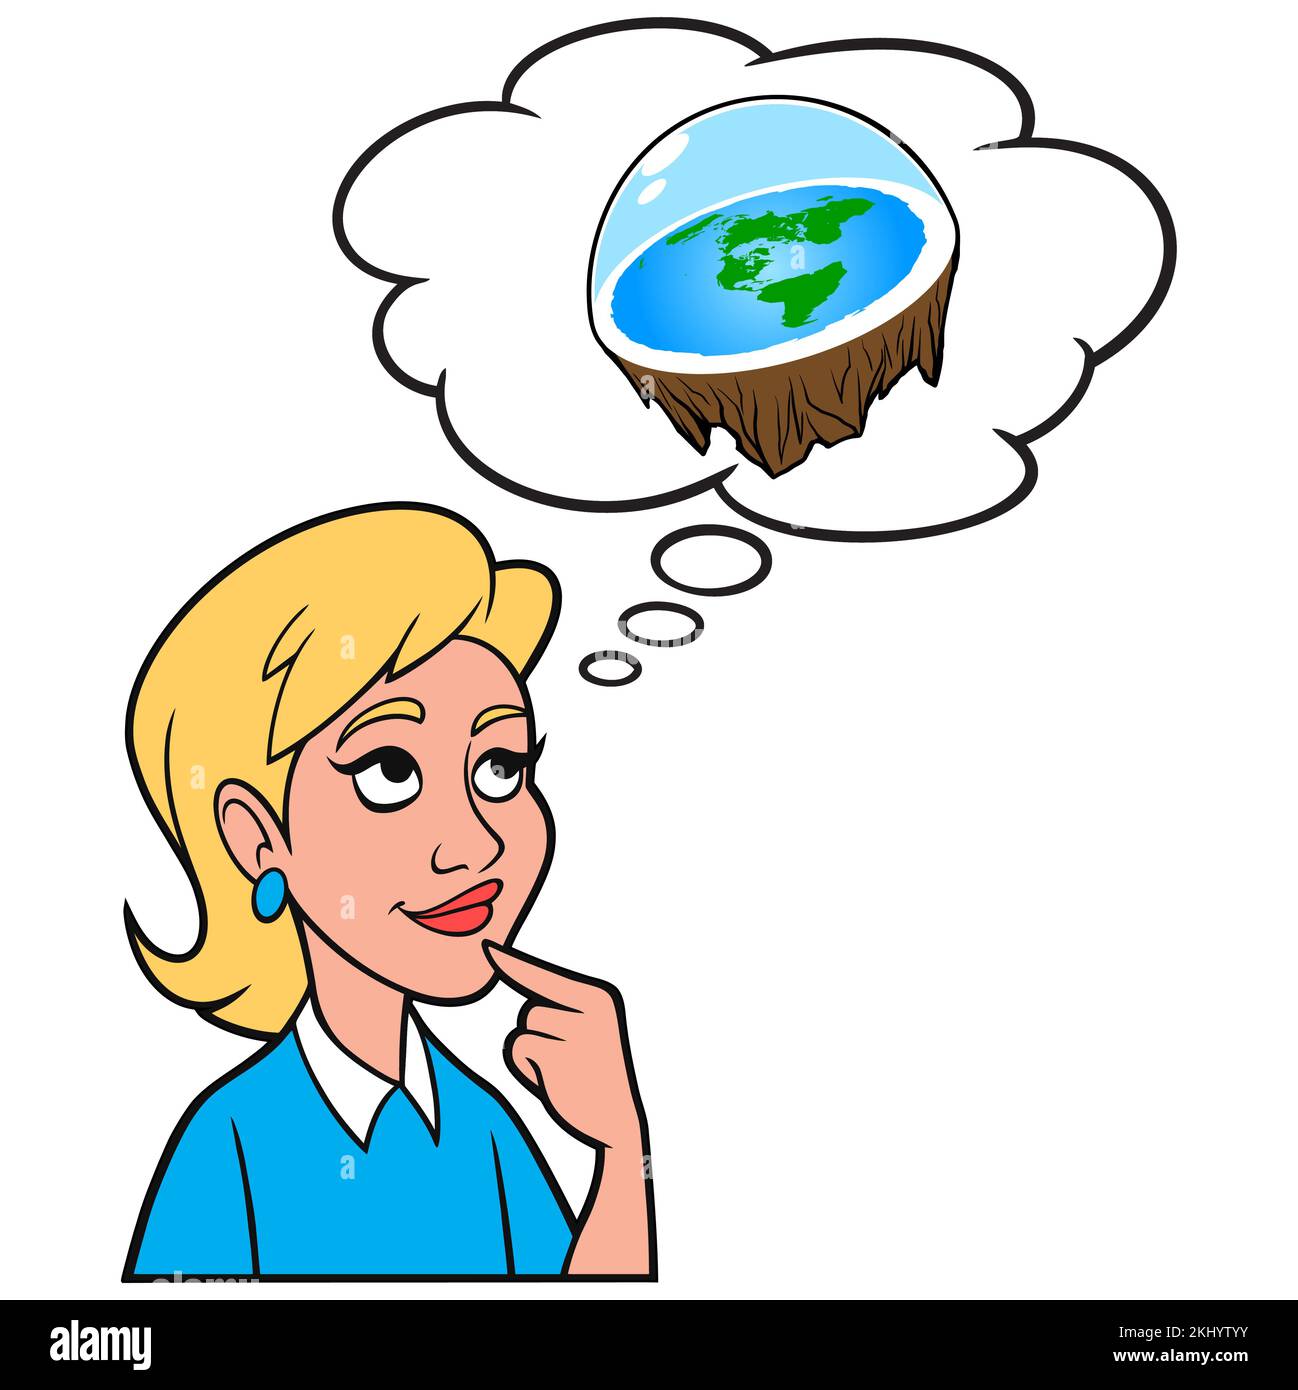 Girl thinking about Flat Earth Theory - A cartoon illustration of a Girl thinking about the concept of the Flat Earth Theory. Stock Vector